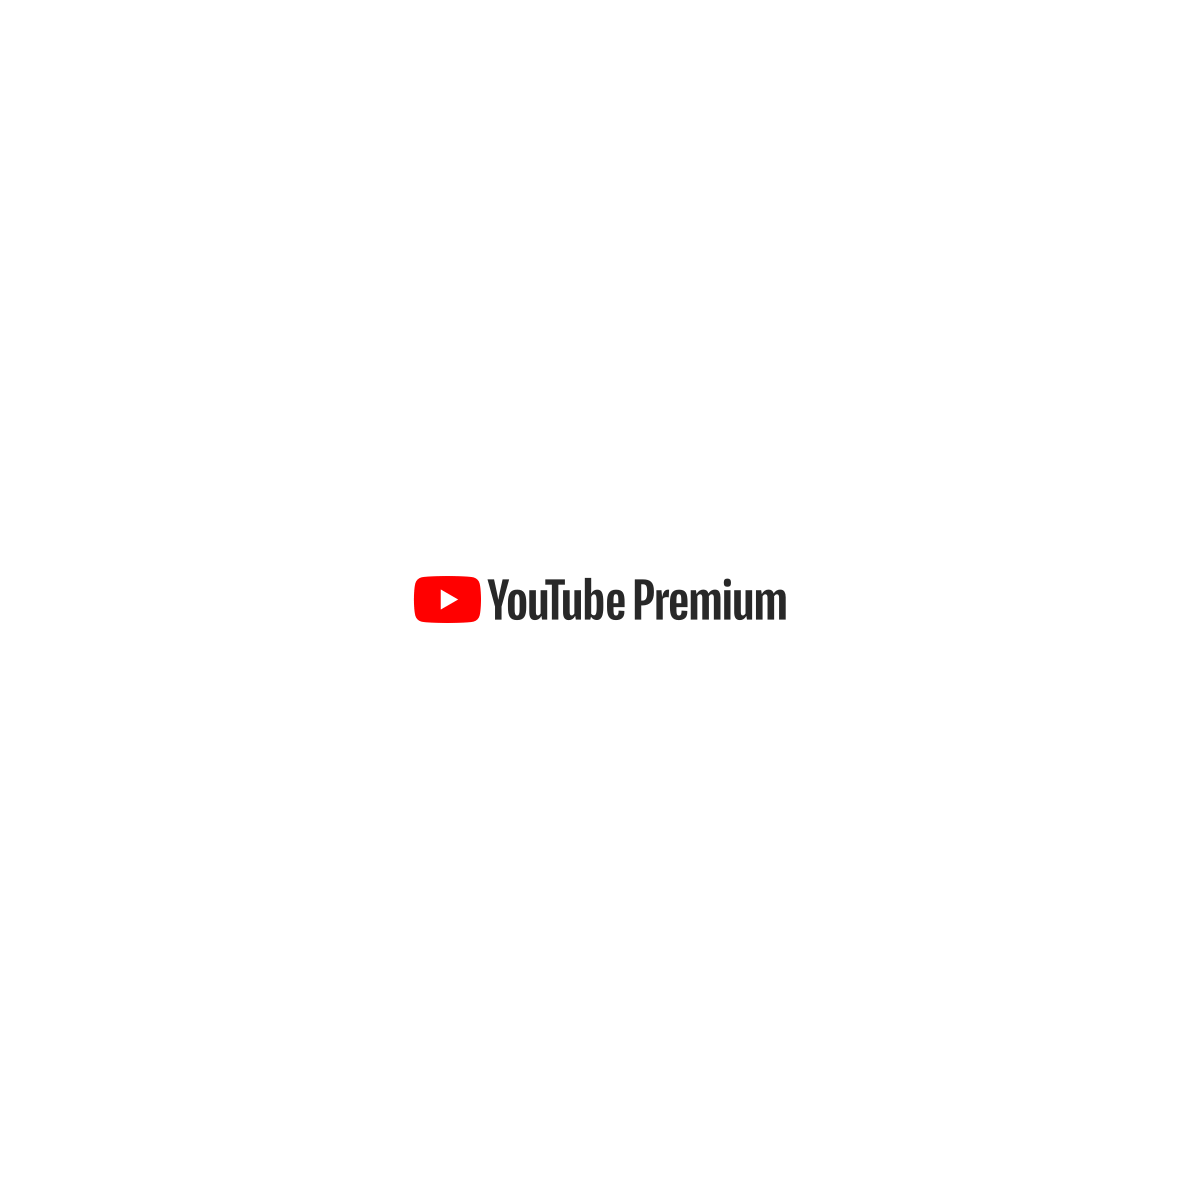 YouTube Premium Has Its Perks. Here Are Some to Consider | WIRED